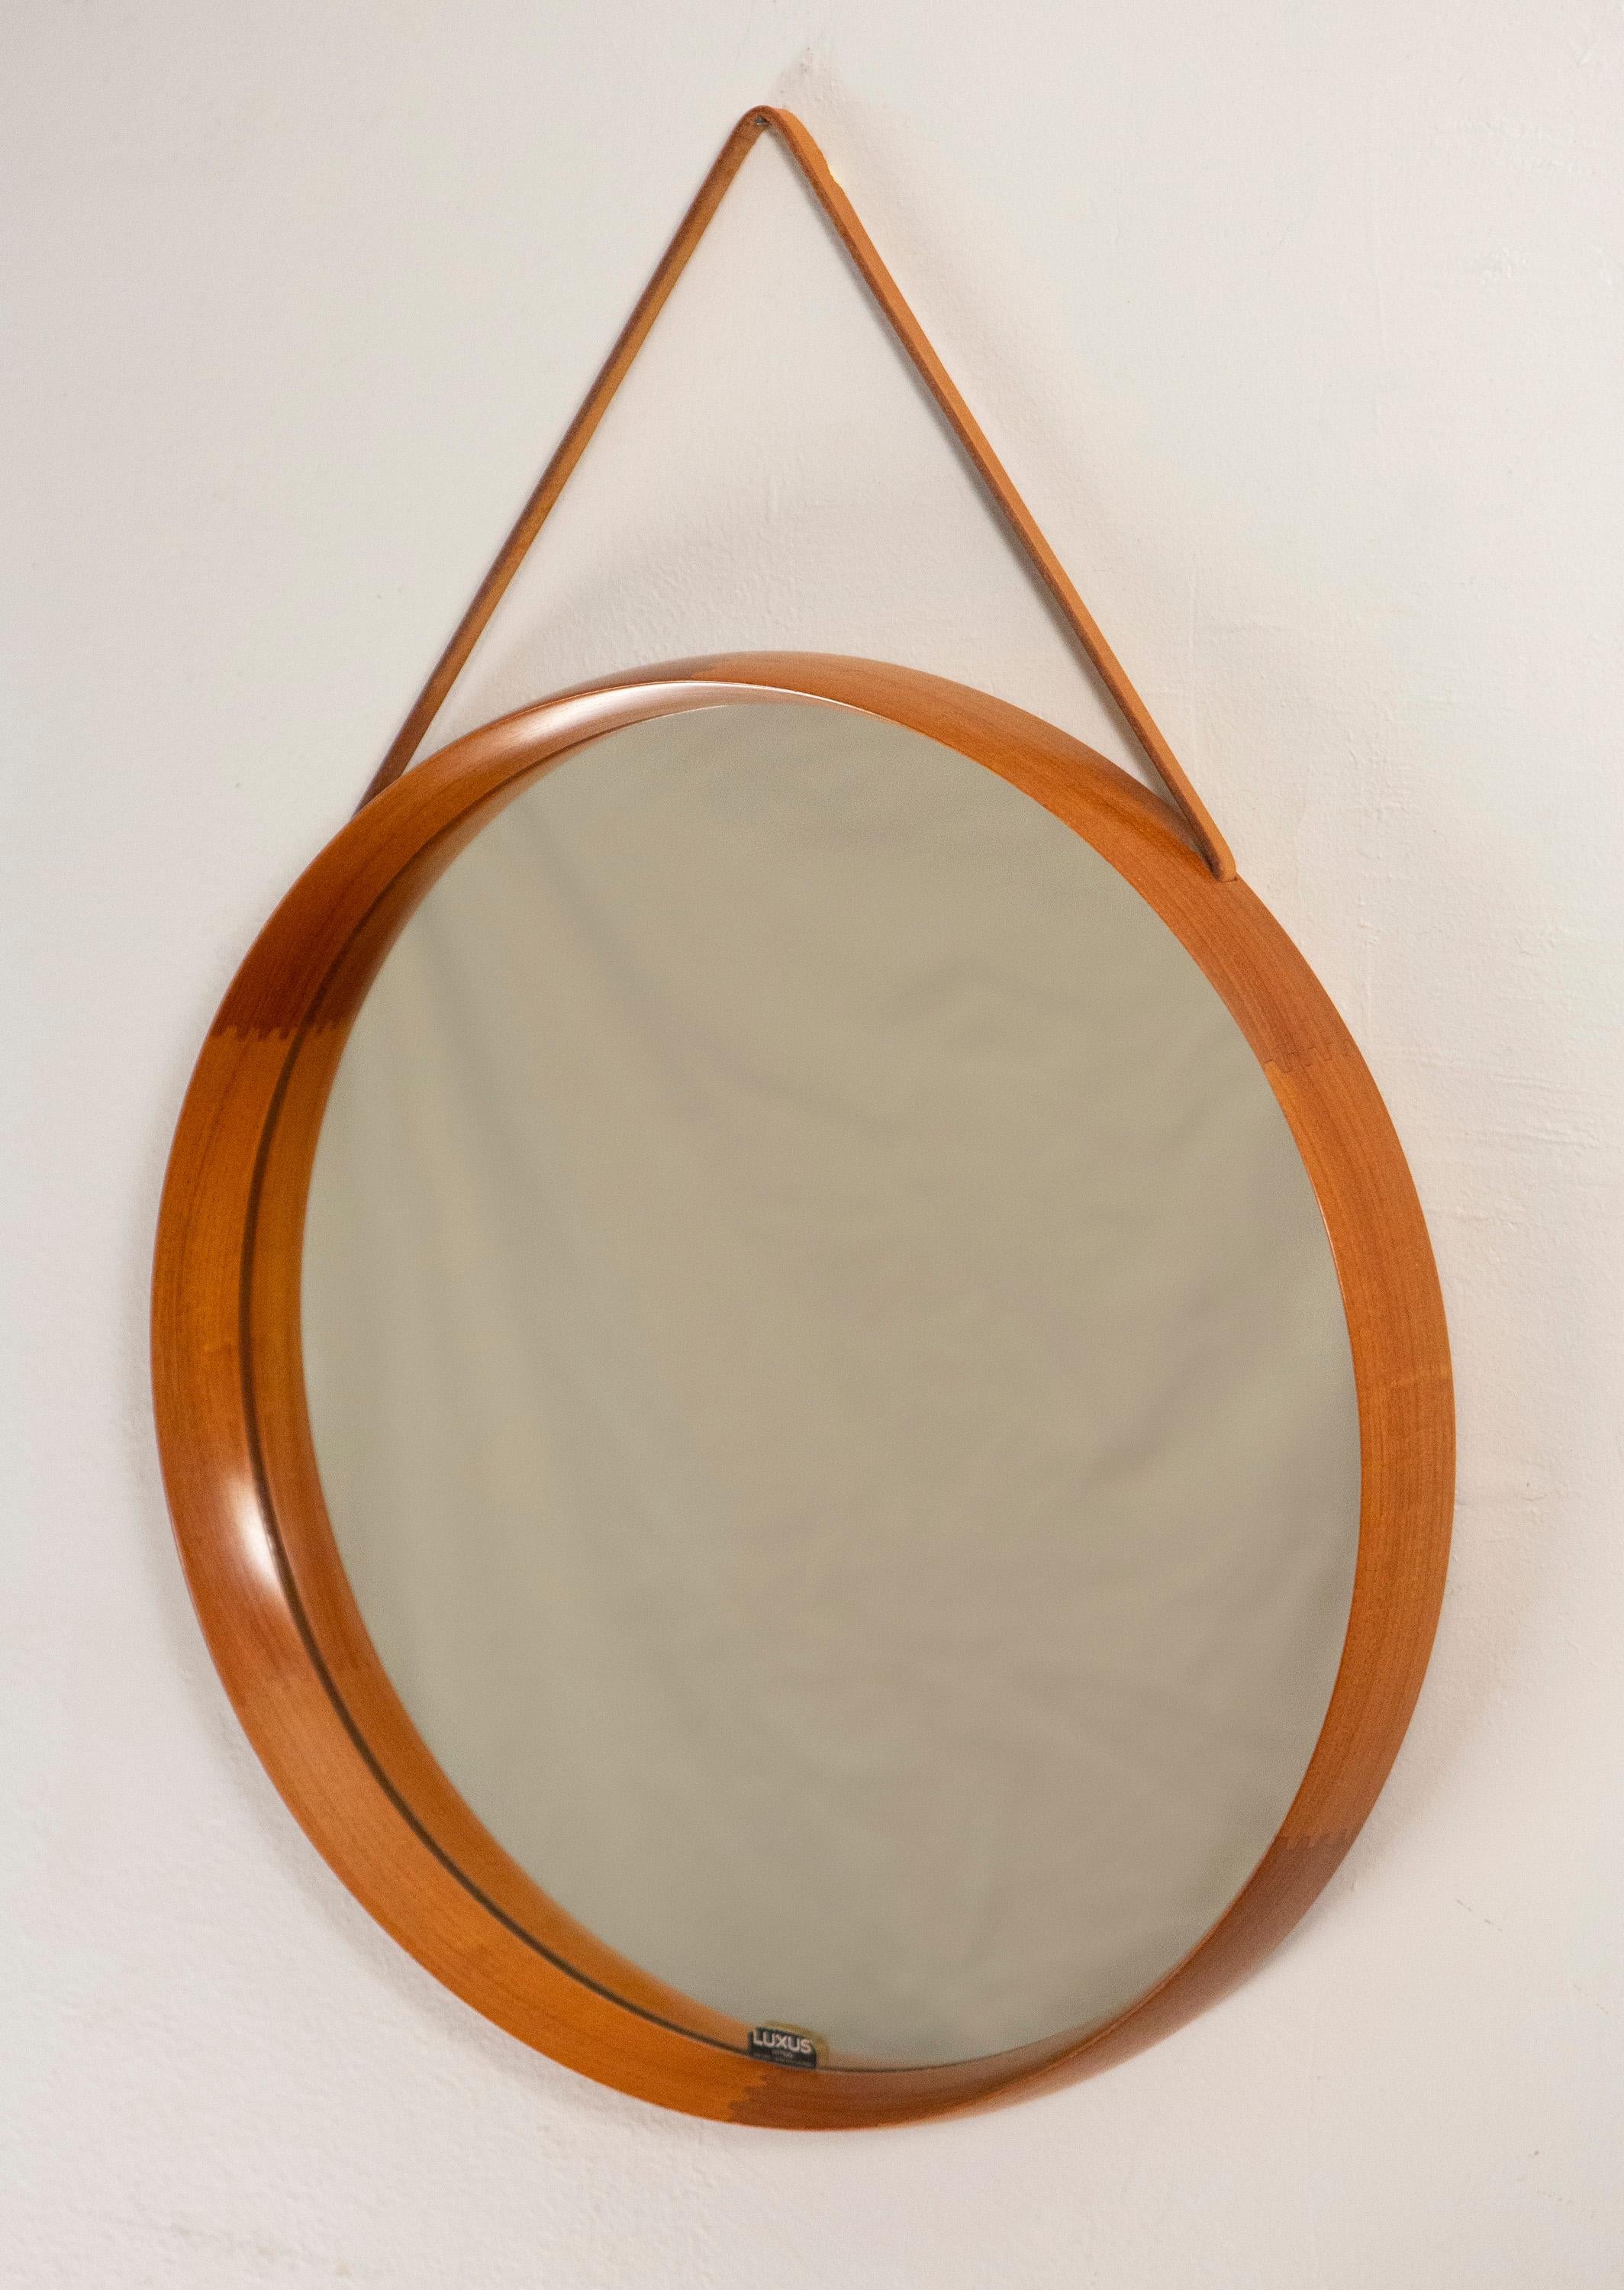 Round Teak Mirror by Uno and Osten Kristiansson for Luxus Vittsjö, Sweden, 1960s

This vintage teak mirror, designed by renowned midcentury Swedish designers Uno and Osten Kristiansson for Luxus at Vittsjö, Sweden in the 1960s, is sought after and